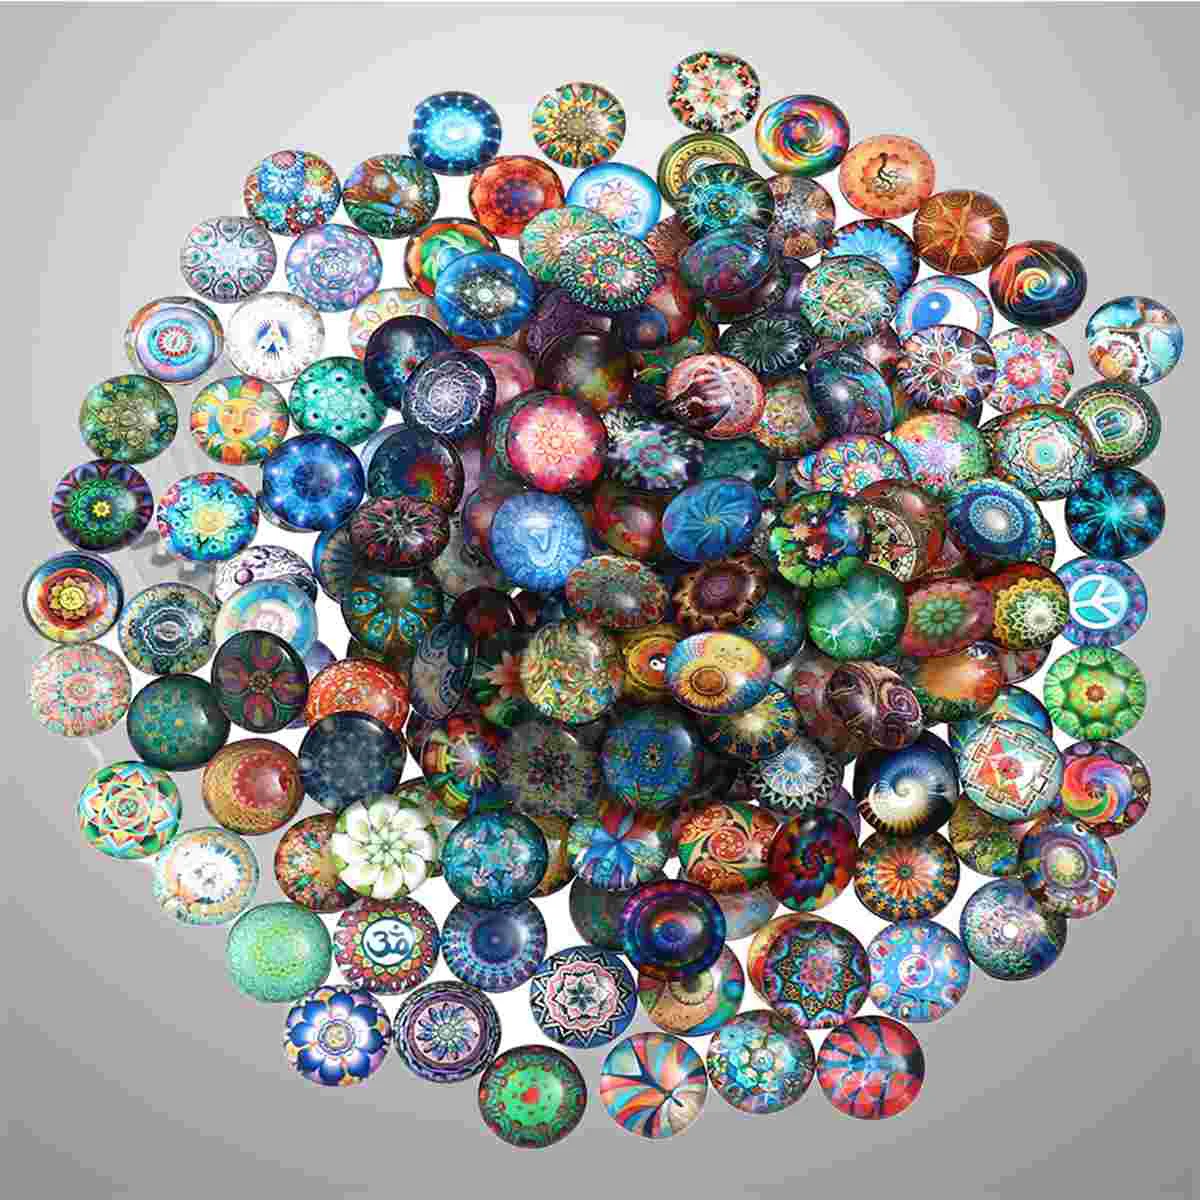 

Mosaic Tiles Round Dome Crafts Jewelry Tile Beads Flatback Making Supplies Half Mixed Gemstone Bead Diy Cover Photo Material